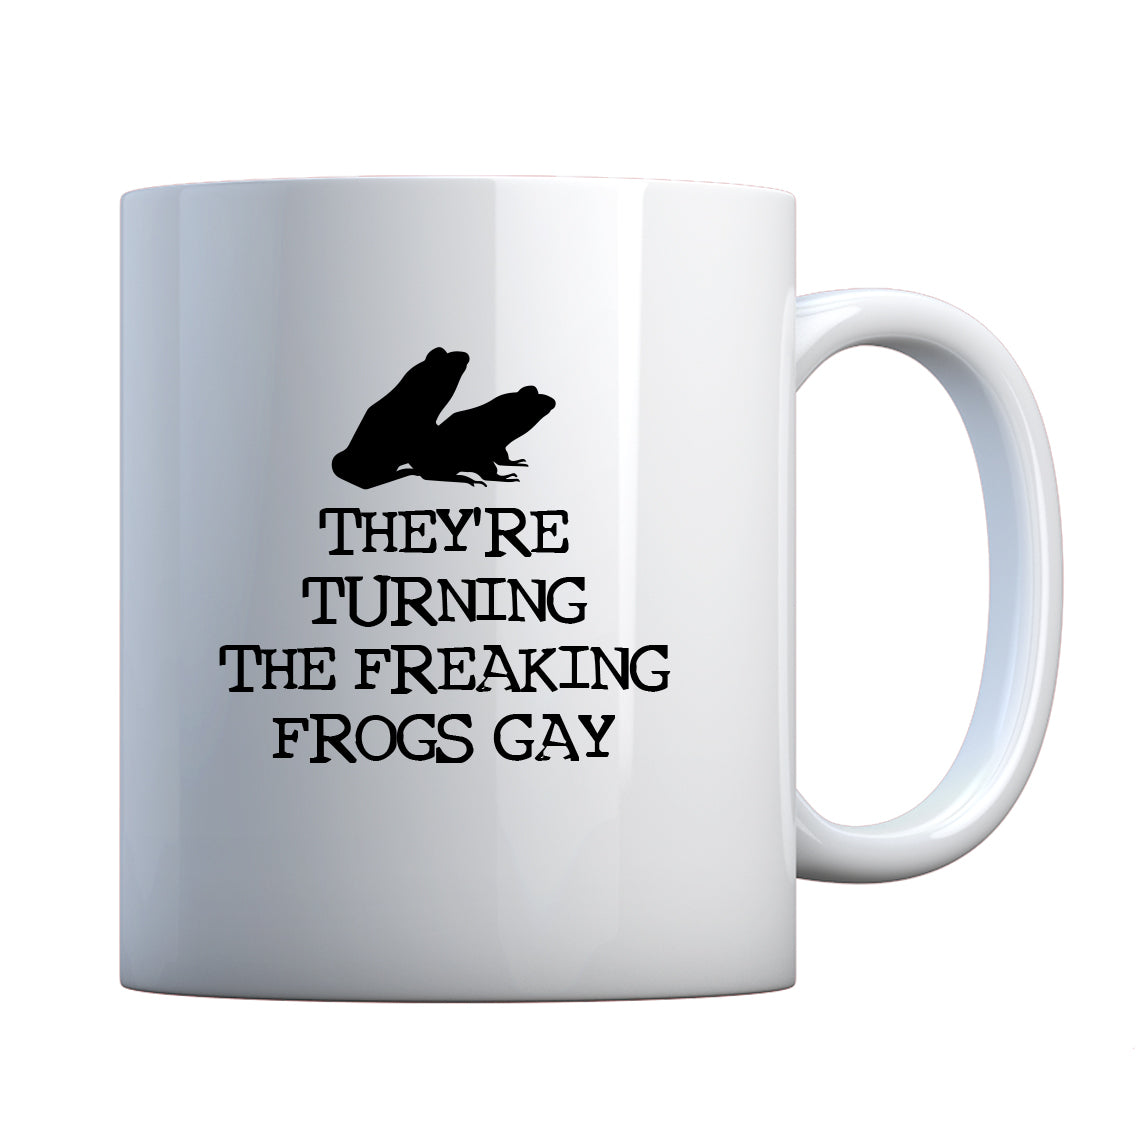 They're Turning the Freaking Frogs Gay! Ceramic Gift Mug